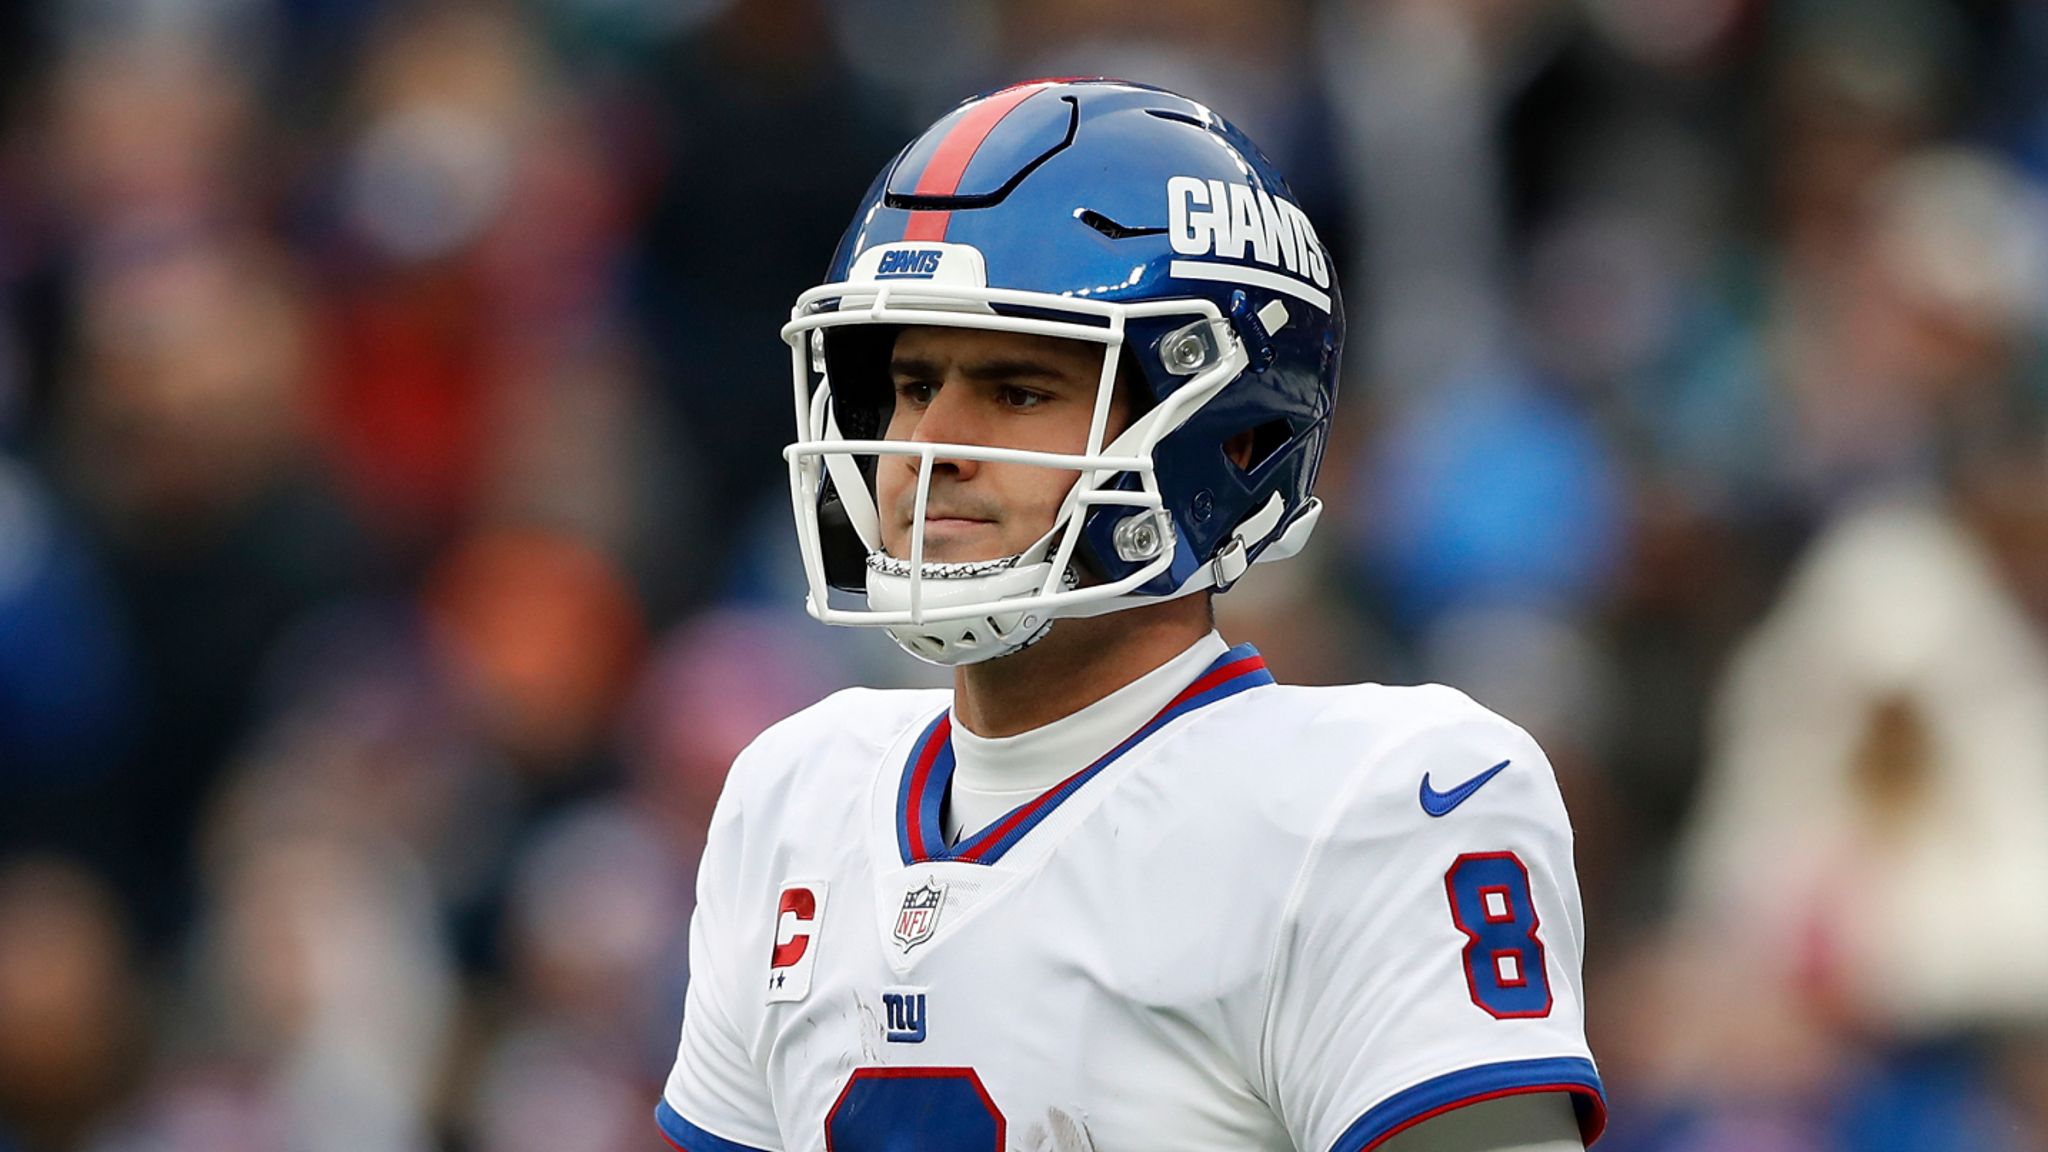 Giants' Joe Judge goes on long, angry rant after 29-3 loss to Bears: 'This  ain't some clown show'